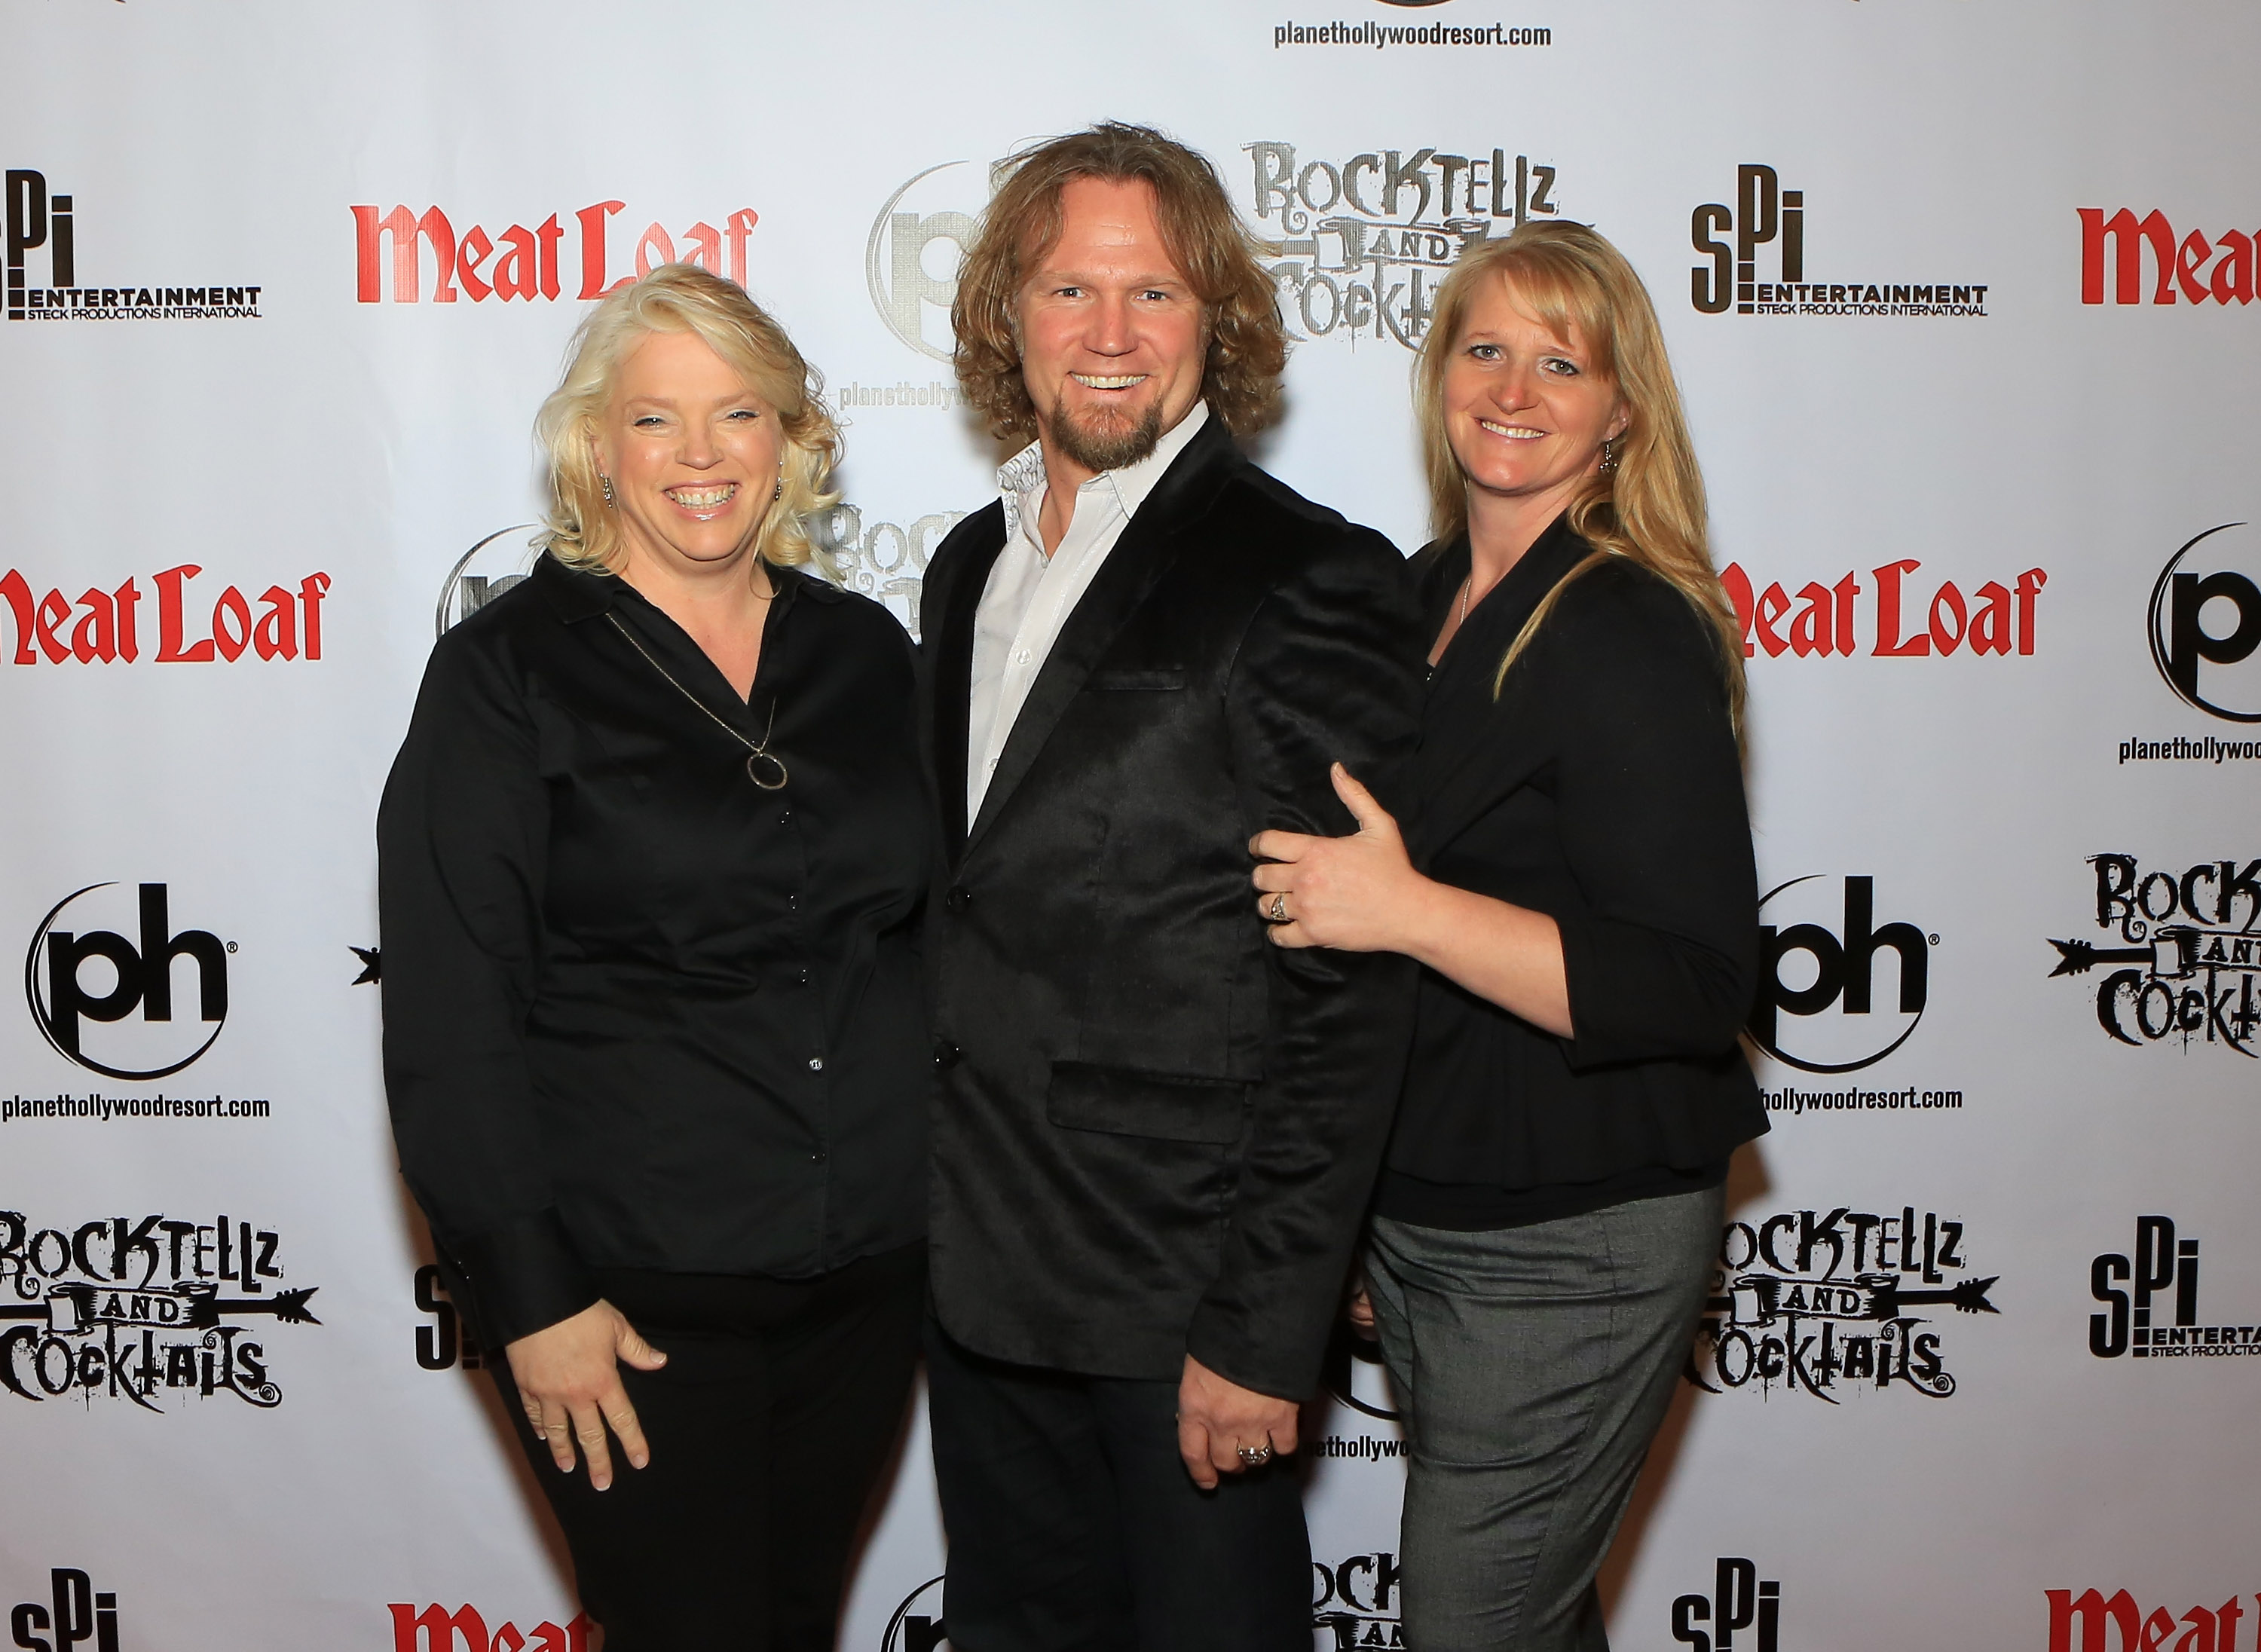 Television personalities Janelle Brown, Kody Brown, and Christine Brown from "Sister Wives" arrive at the show "RockTellz & CockTails Presents Meat Loaf" at Planet Hollywood Resort & Casino on October 3, 2013 in Las Vegas, Nevada. | Source: Getty Images